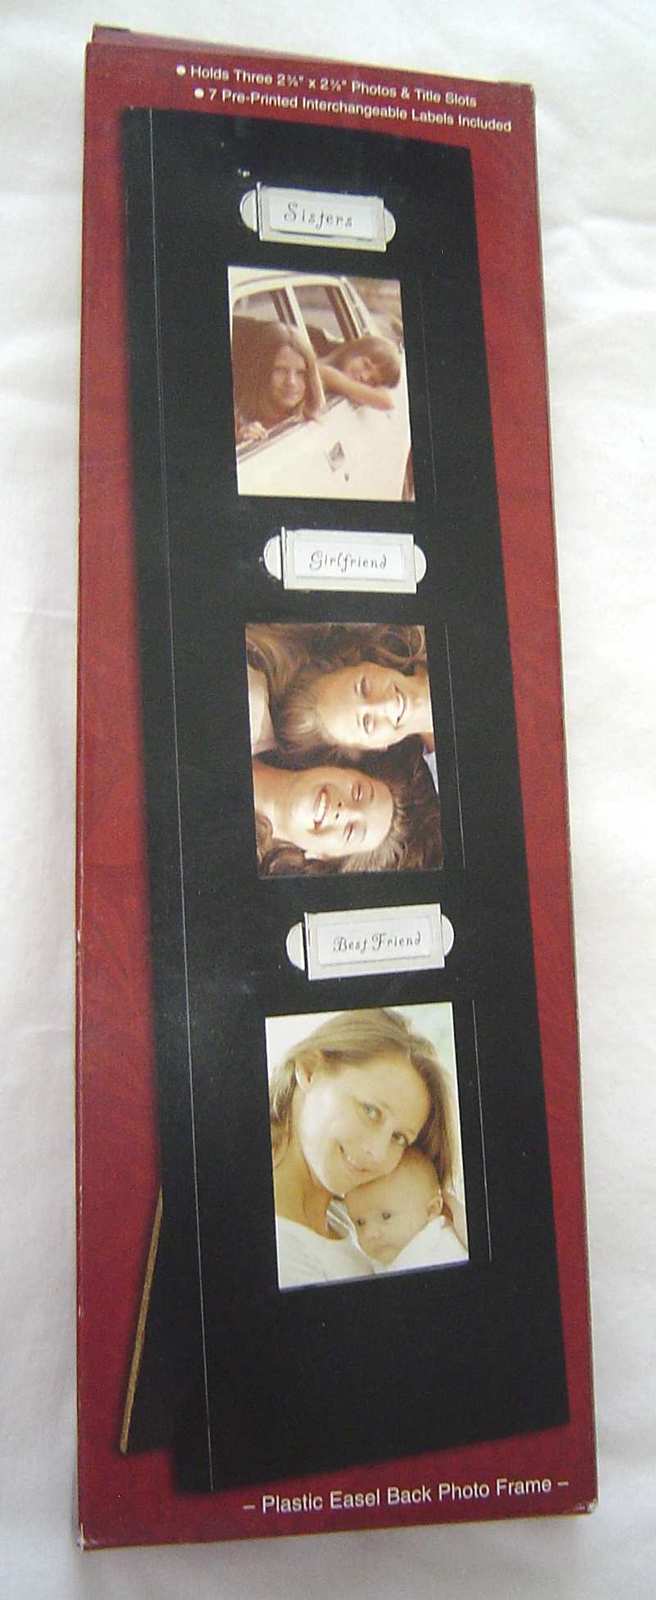 Triple Photo Frame Vertical Holds 2 3/8"X 2 3/8" Size Photos Pre Printed label  - $14.99